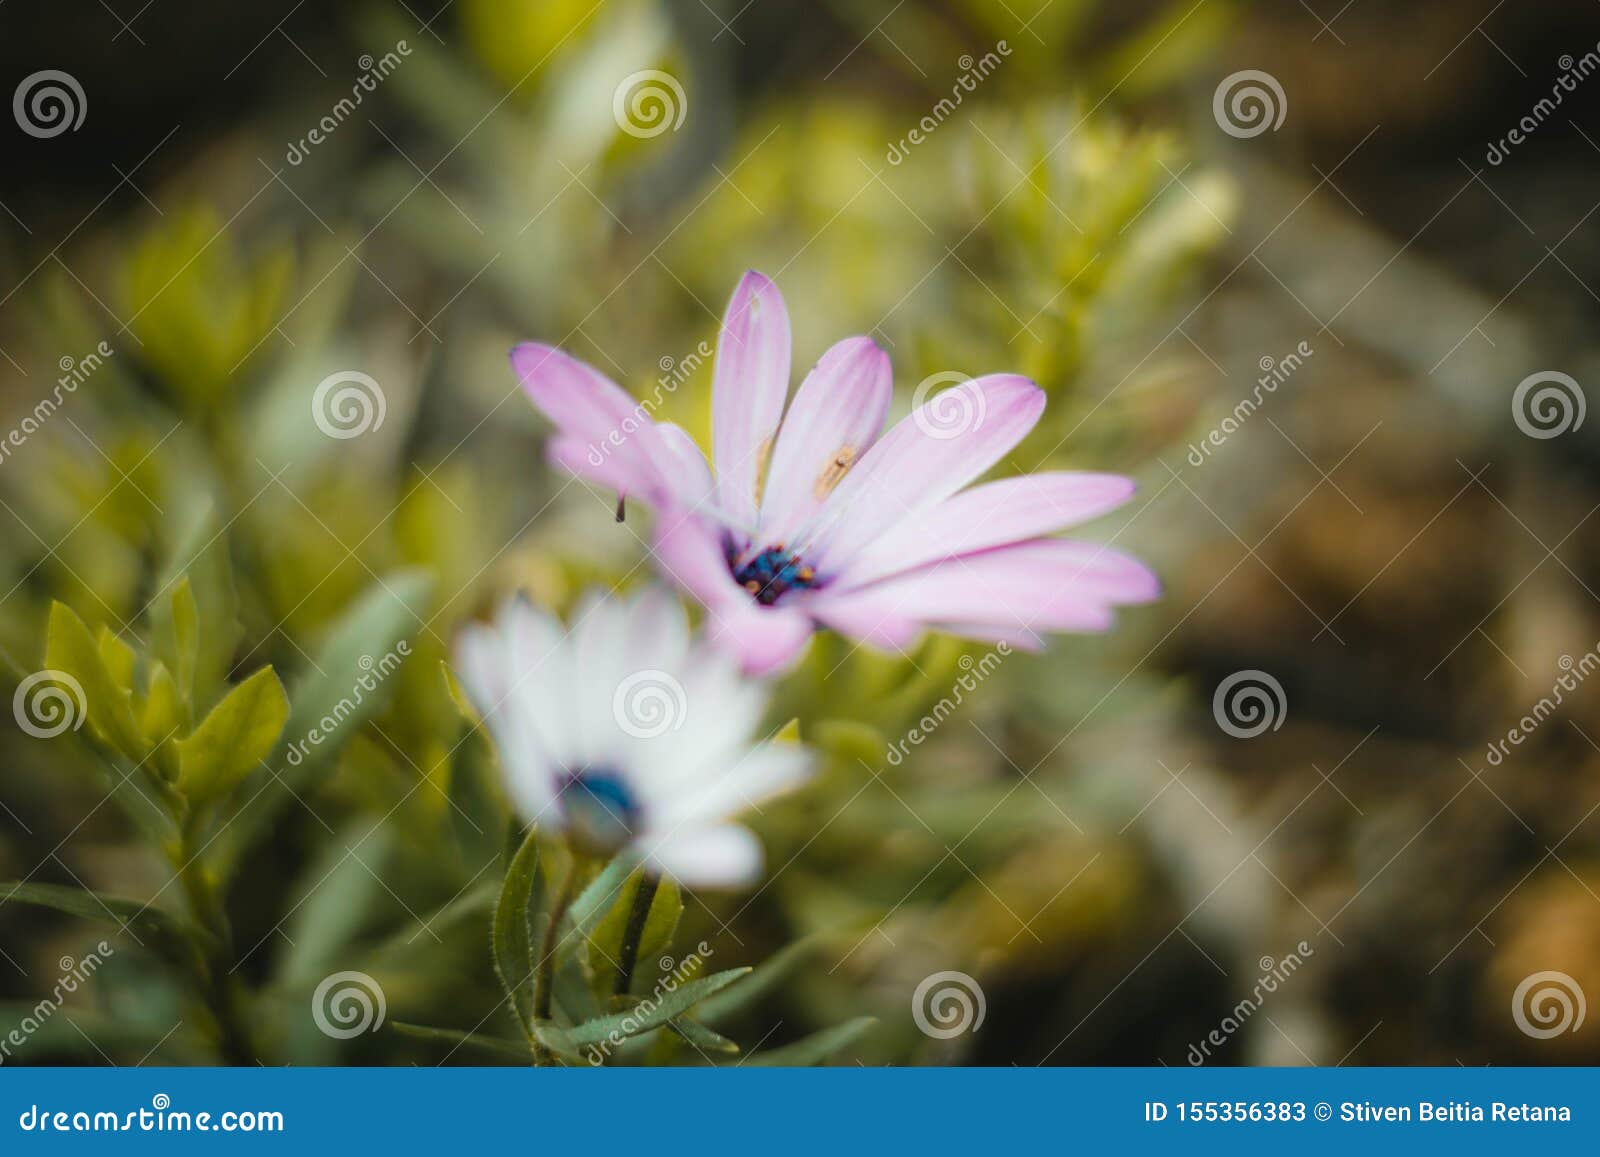 white and purple flowers and macro vegetation in the forest